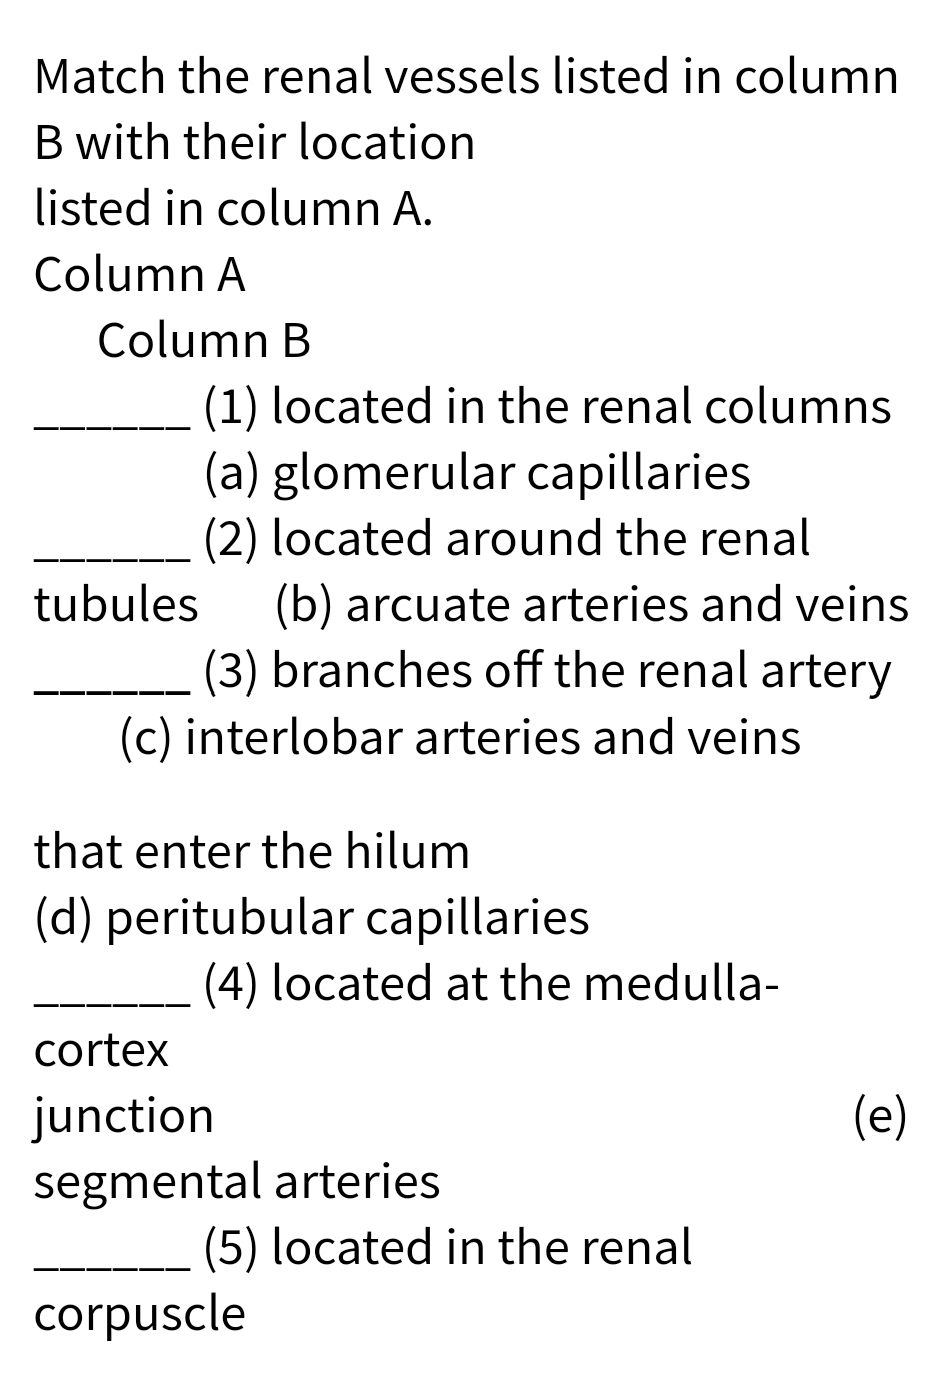 Match the renal vessels listed in column
B with their location
listed in column A.
Column A
Column B
(1) located in the renal columns
(a) glomerular capillaries
(2) located around the renal
(b) arcuate arteries and veins
(3) branches off the renal artery
(c) interlobar arteries and veins
tubules
that enter the hilum
(d) peritubular capillaries
(4) located at the medulla-
cortex
(e)
junction
segmental arteries
(5) located in the renal
corpuscle
